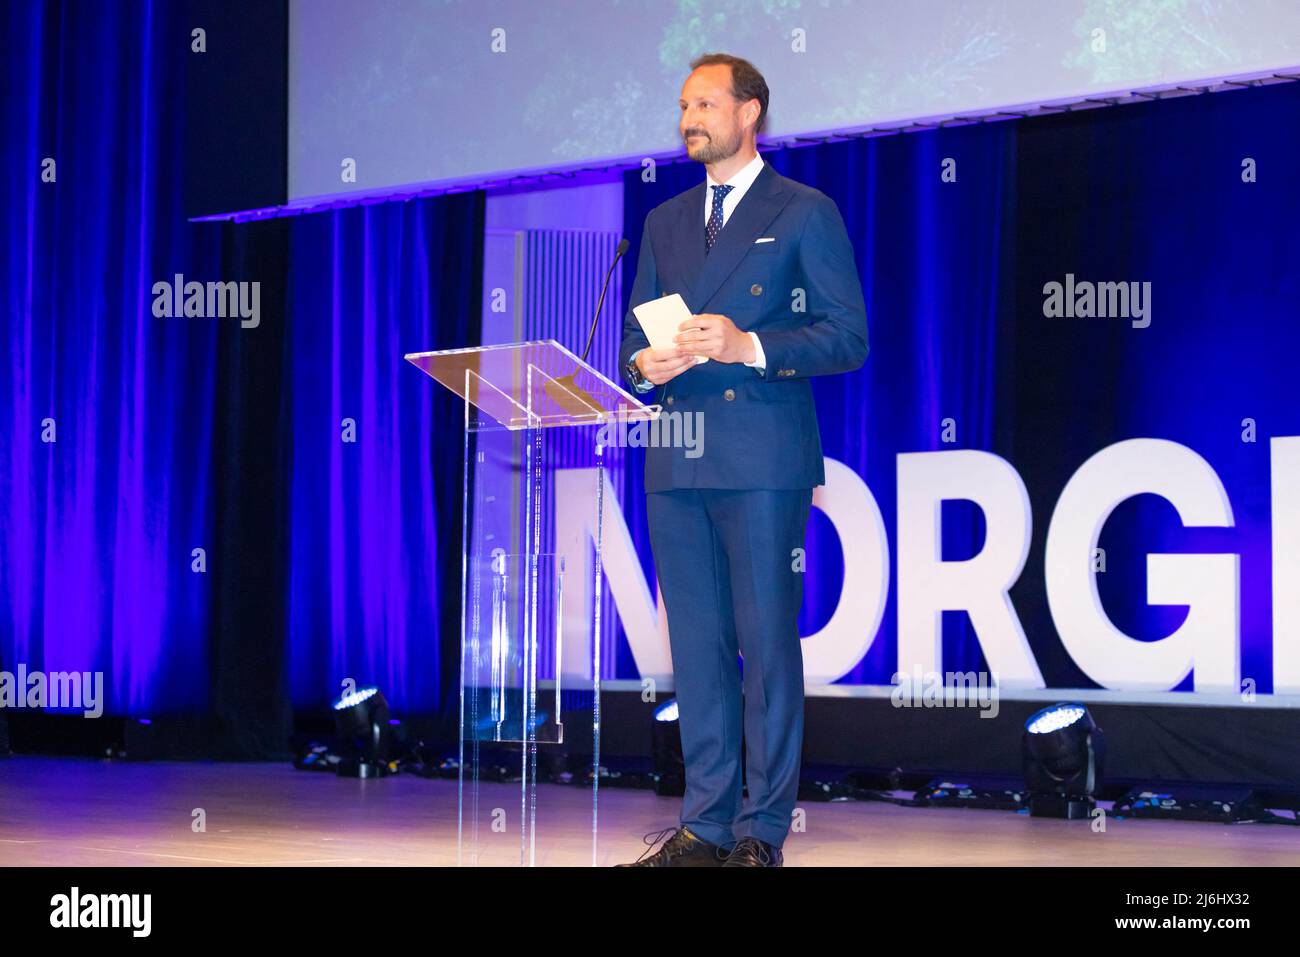 Sweden Prince Haakon at the Karolinska Institutet on the 1st day of the official 3 day visit of the Norwegian couple to Sweden. Stockholm, Sweden on April 2, 2022. Photo by Charlotte Brunzell/Stella Pictures/ABACAPRESS.COM Stock Photo